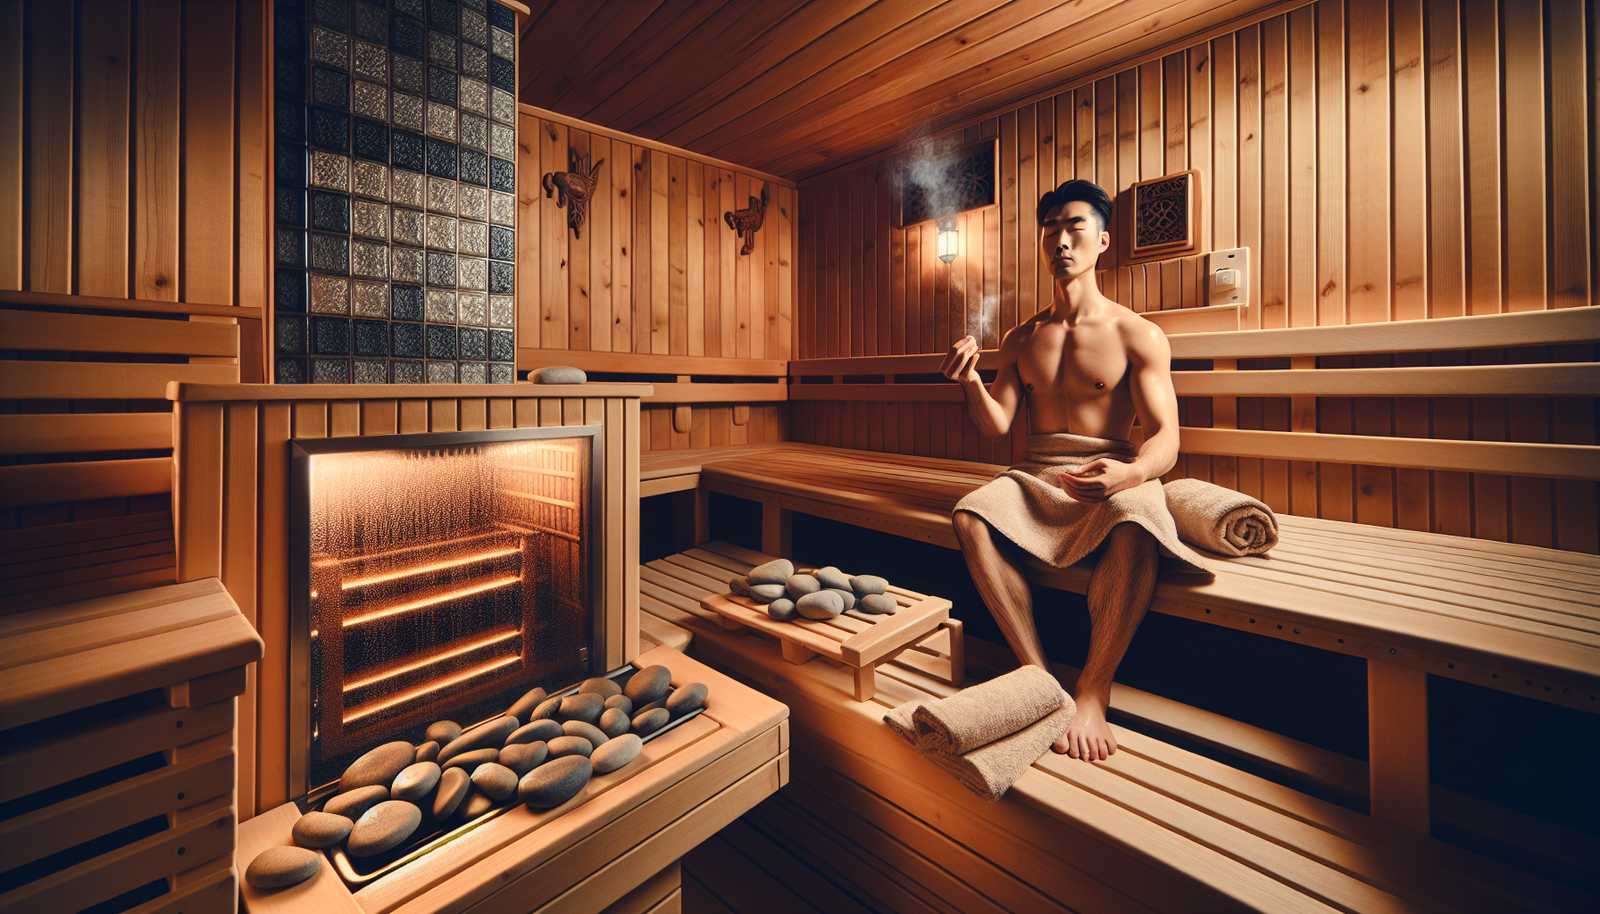 Are There Any Special Breathing Techniques For Sauna Use?